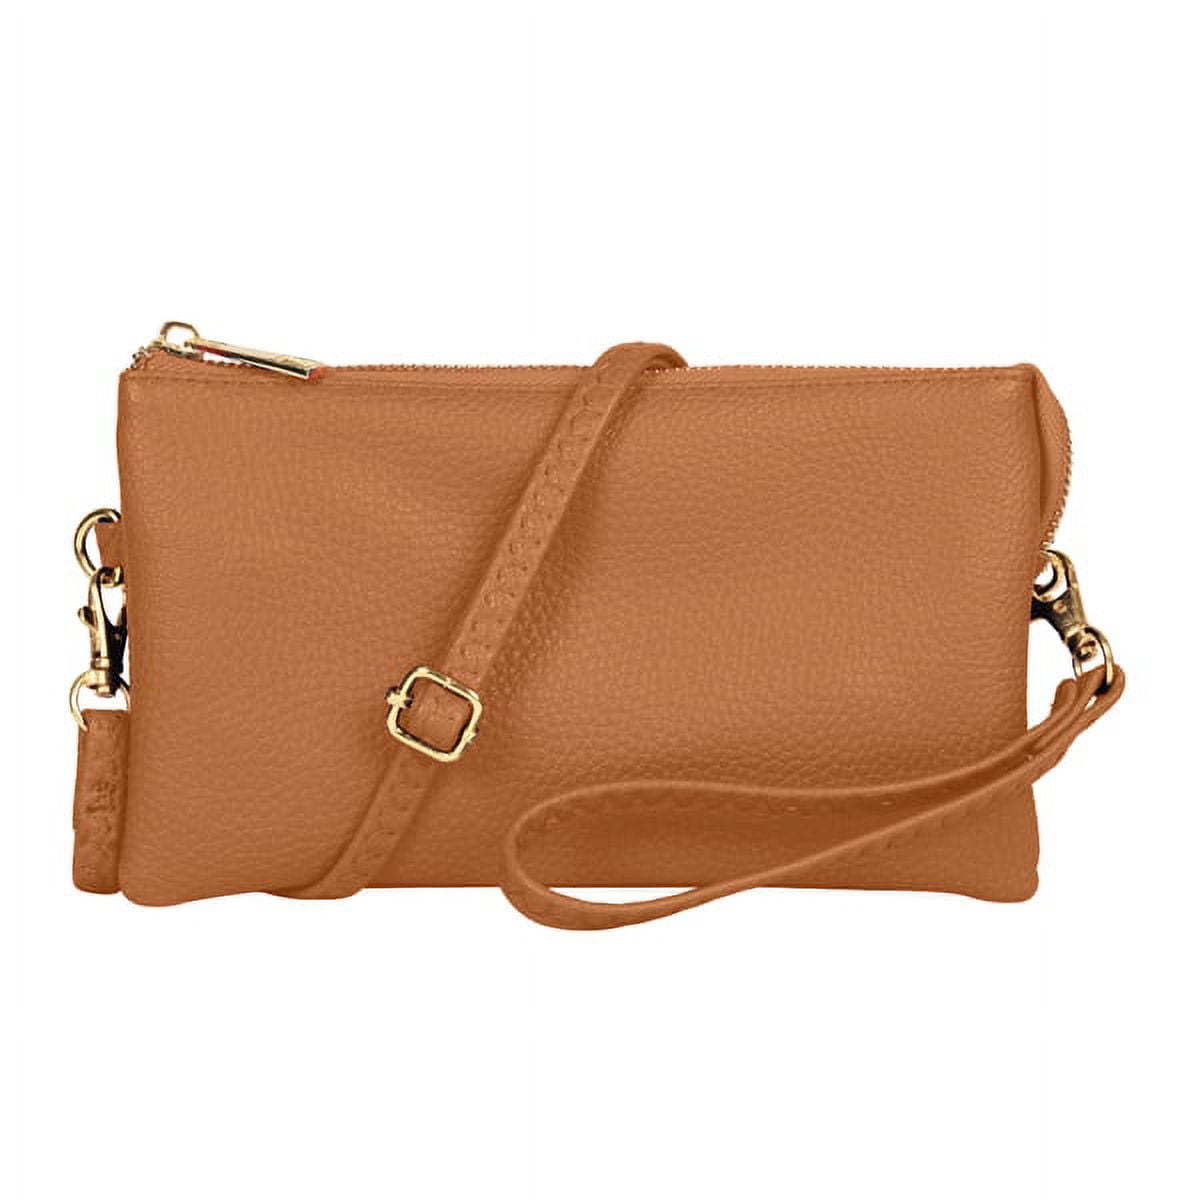 Leather Crossbody bag. Leather clutch bag with removable strap